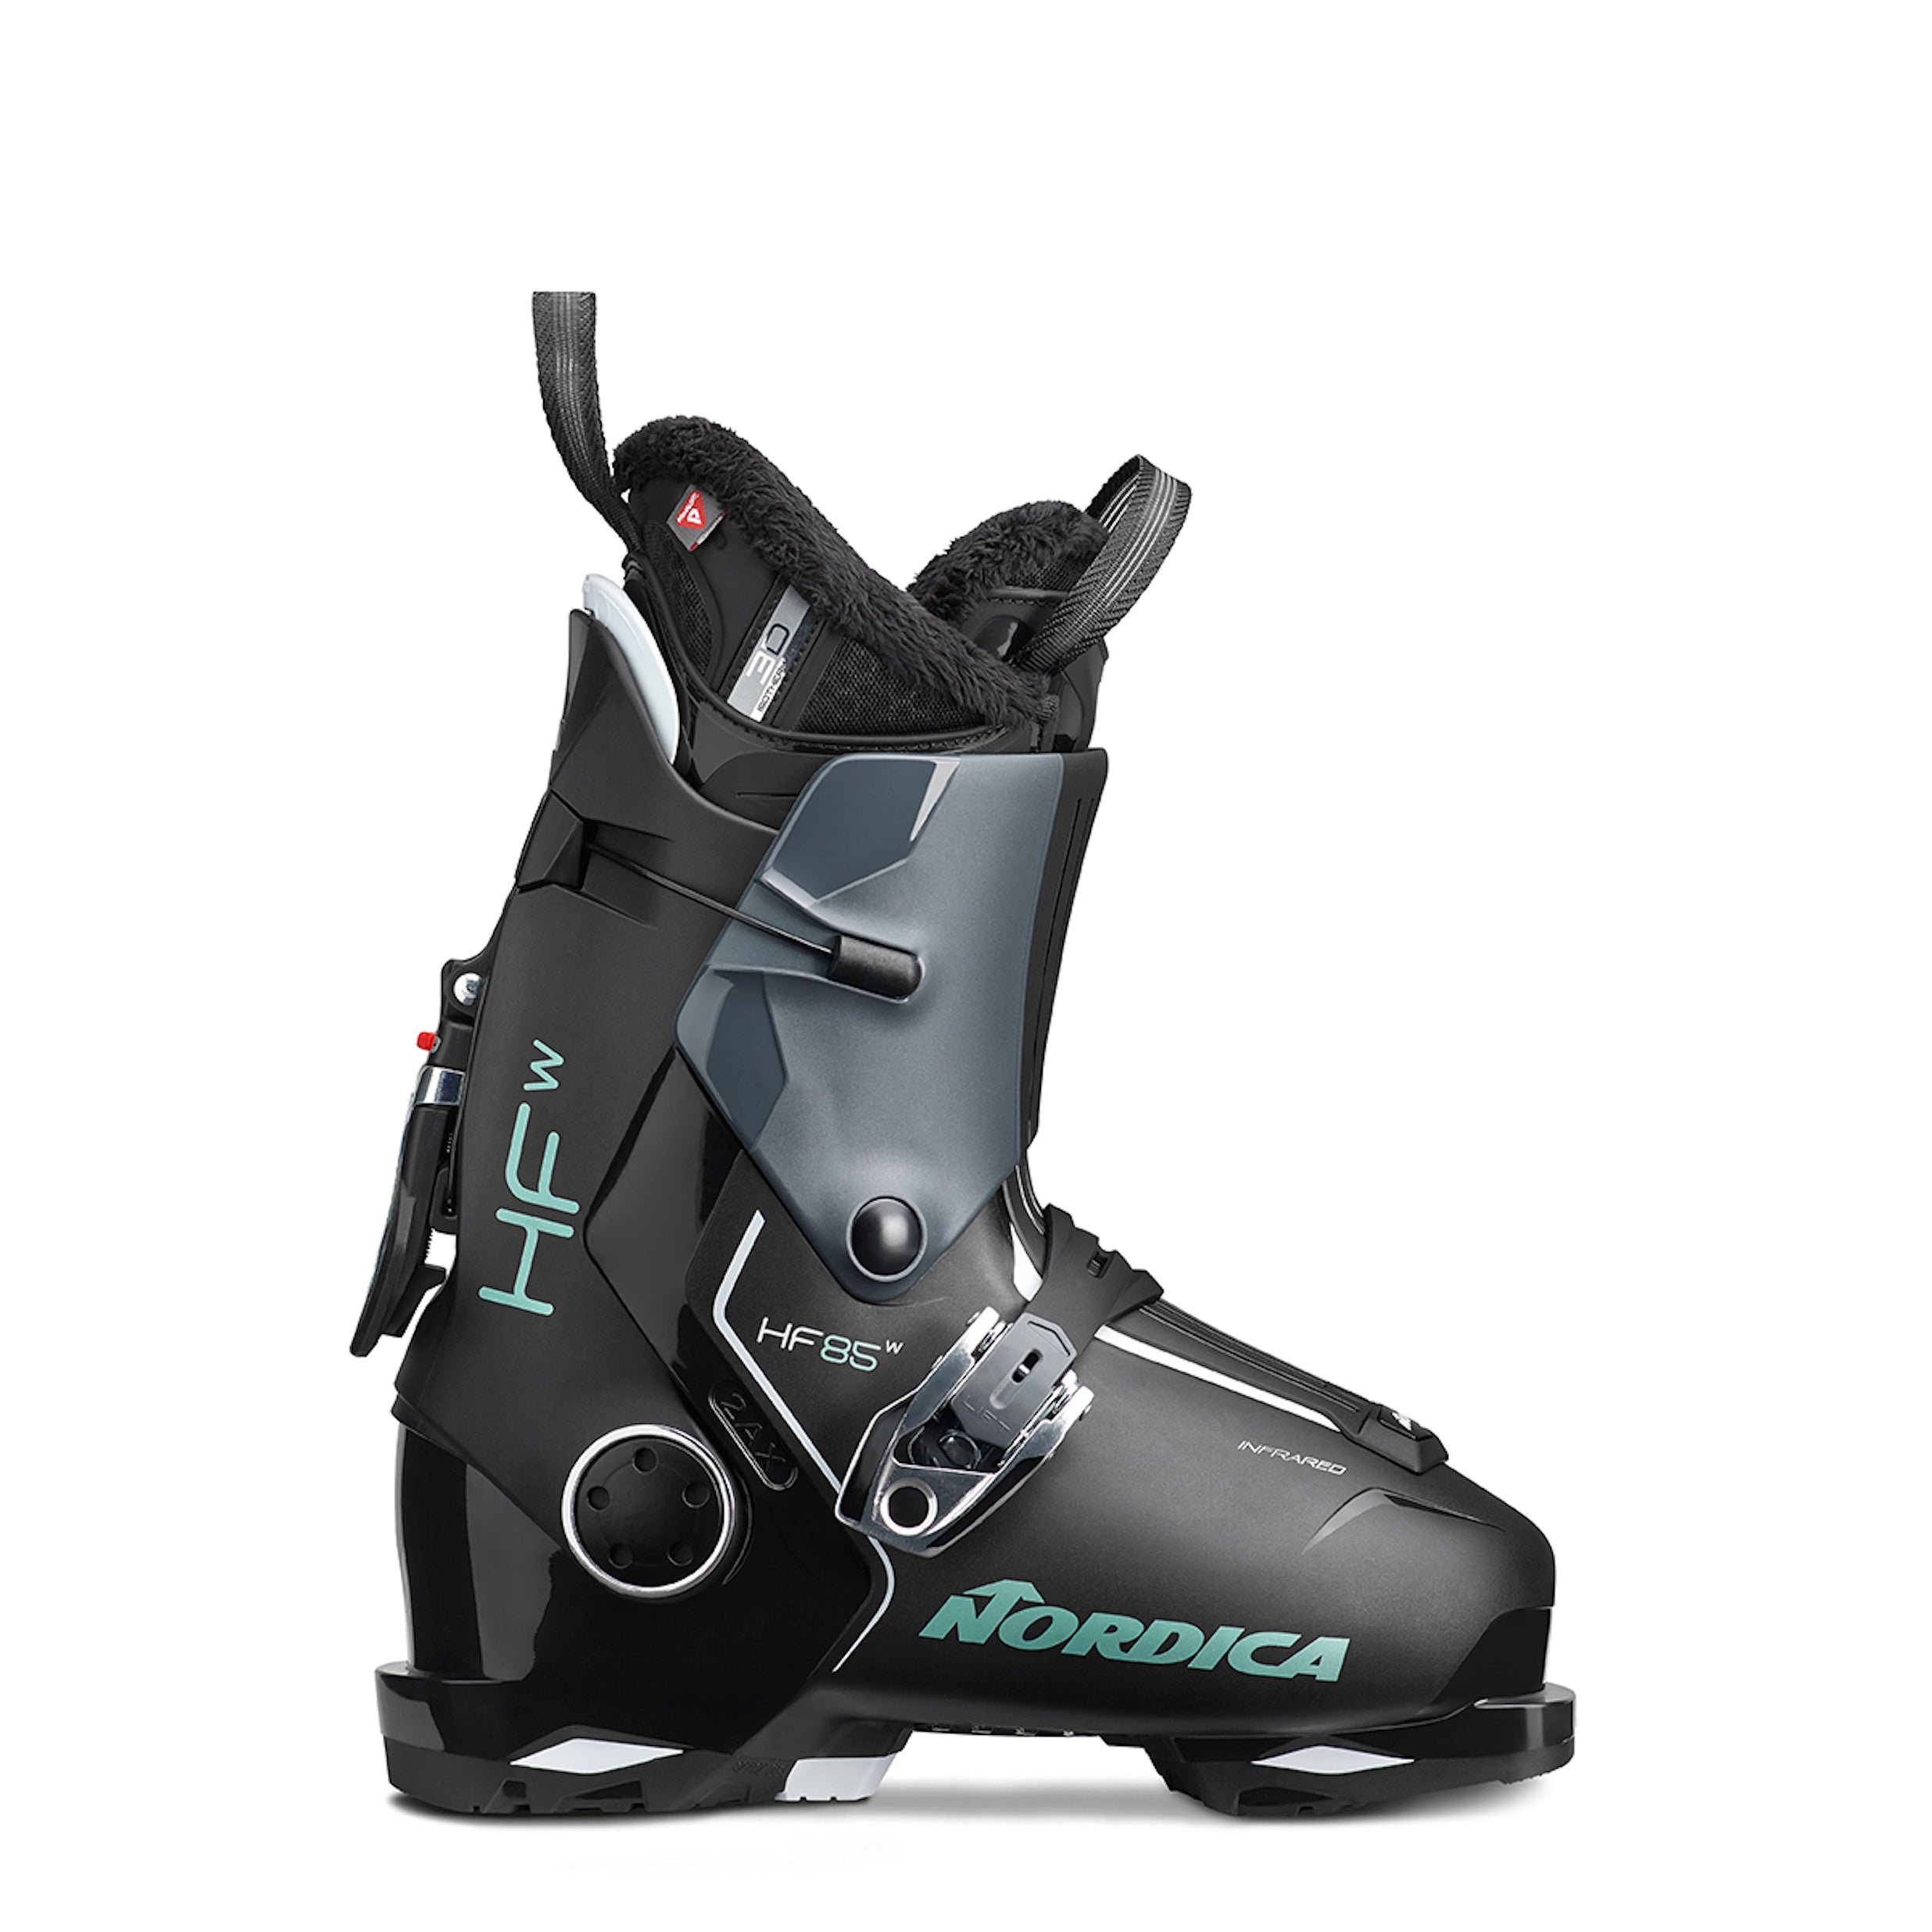 Women's Nordica HF 85, black ski boot with grey upper cuff and two buckles, one upper and one lower.